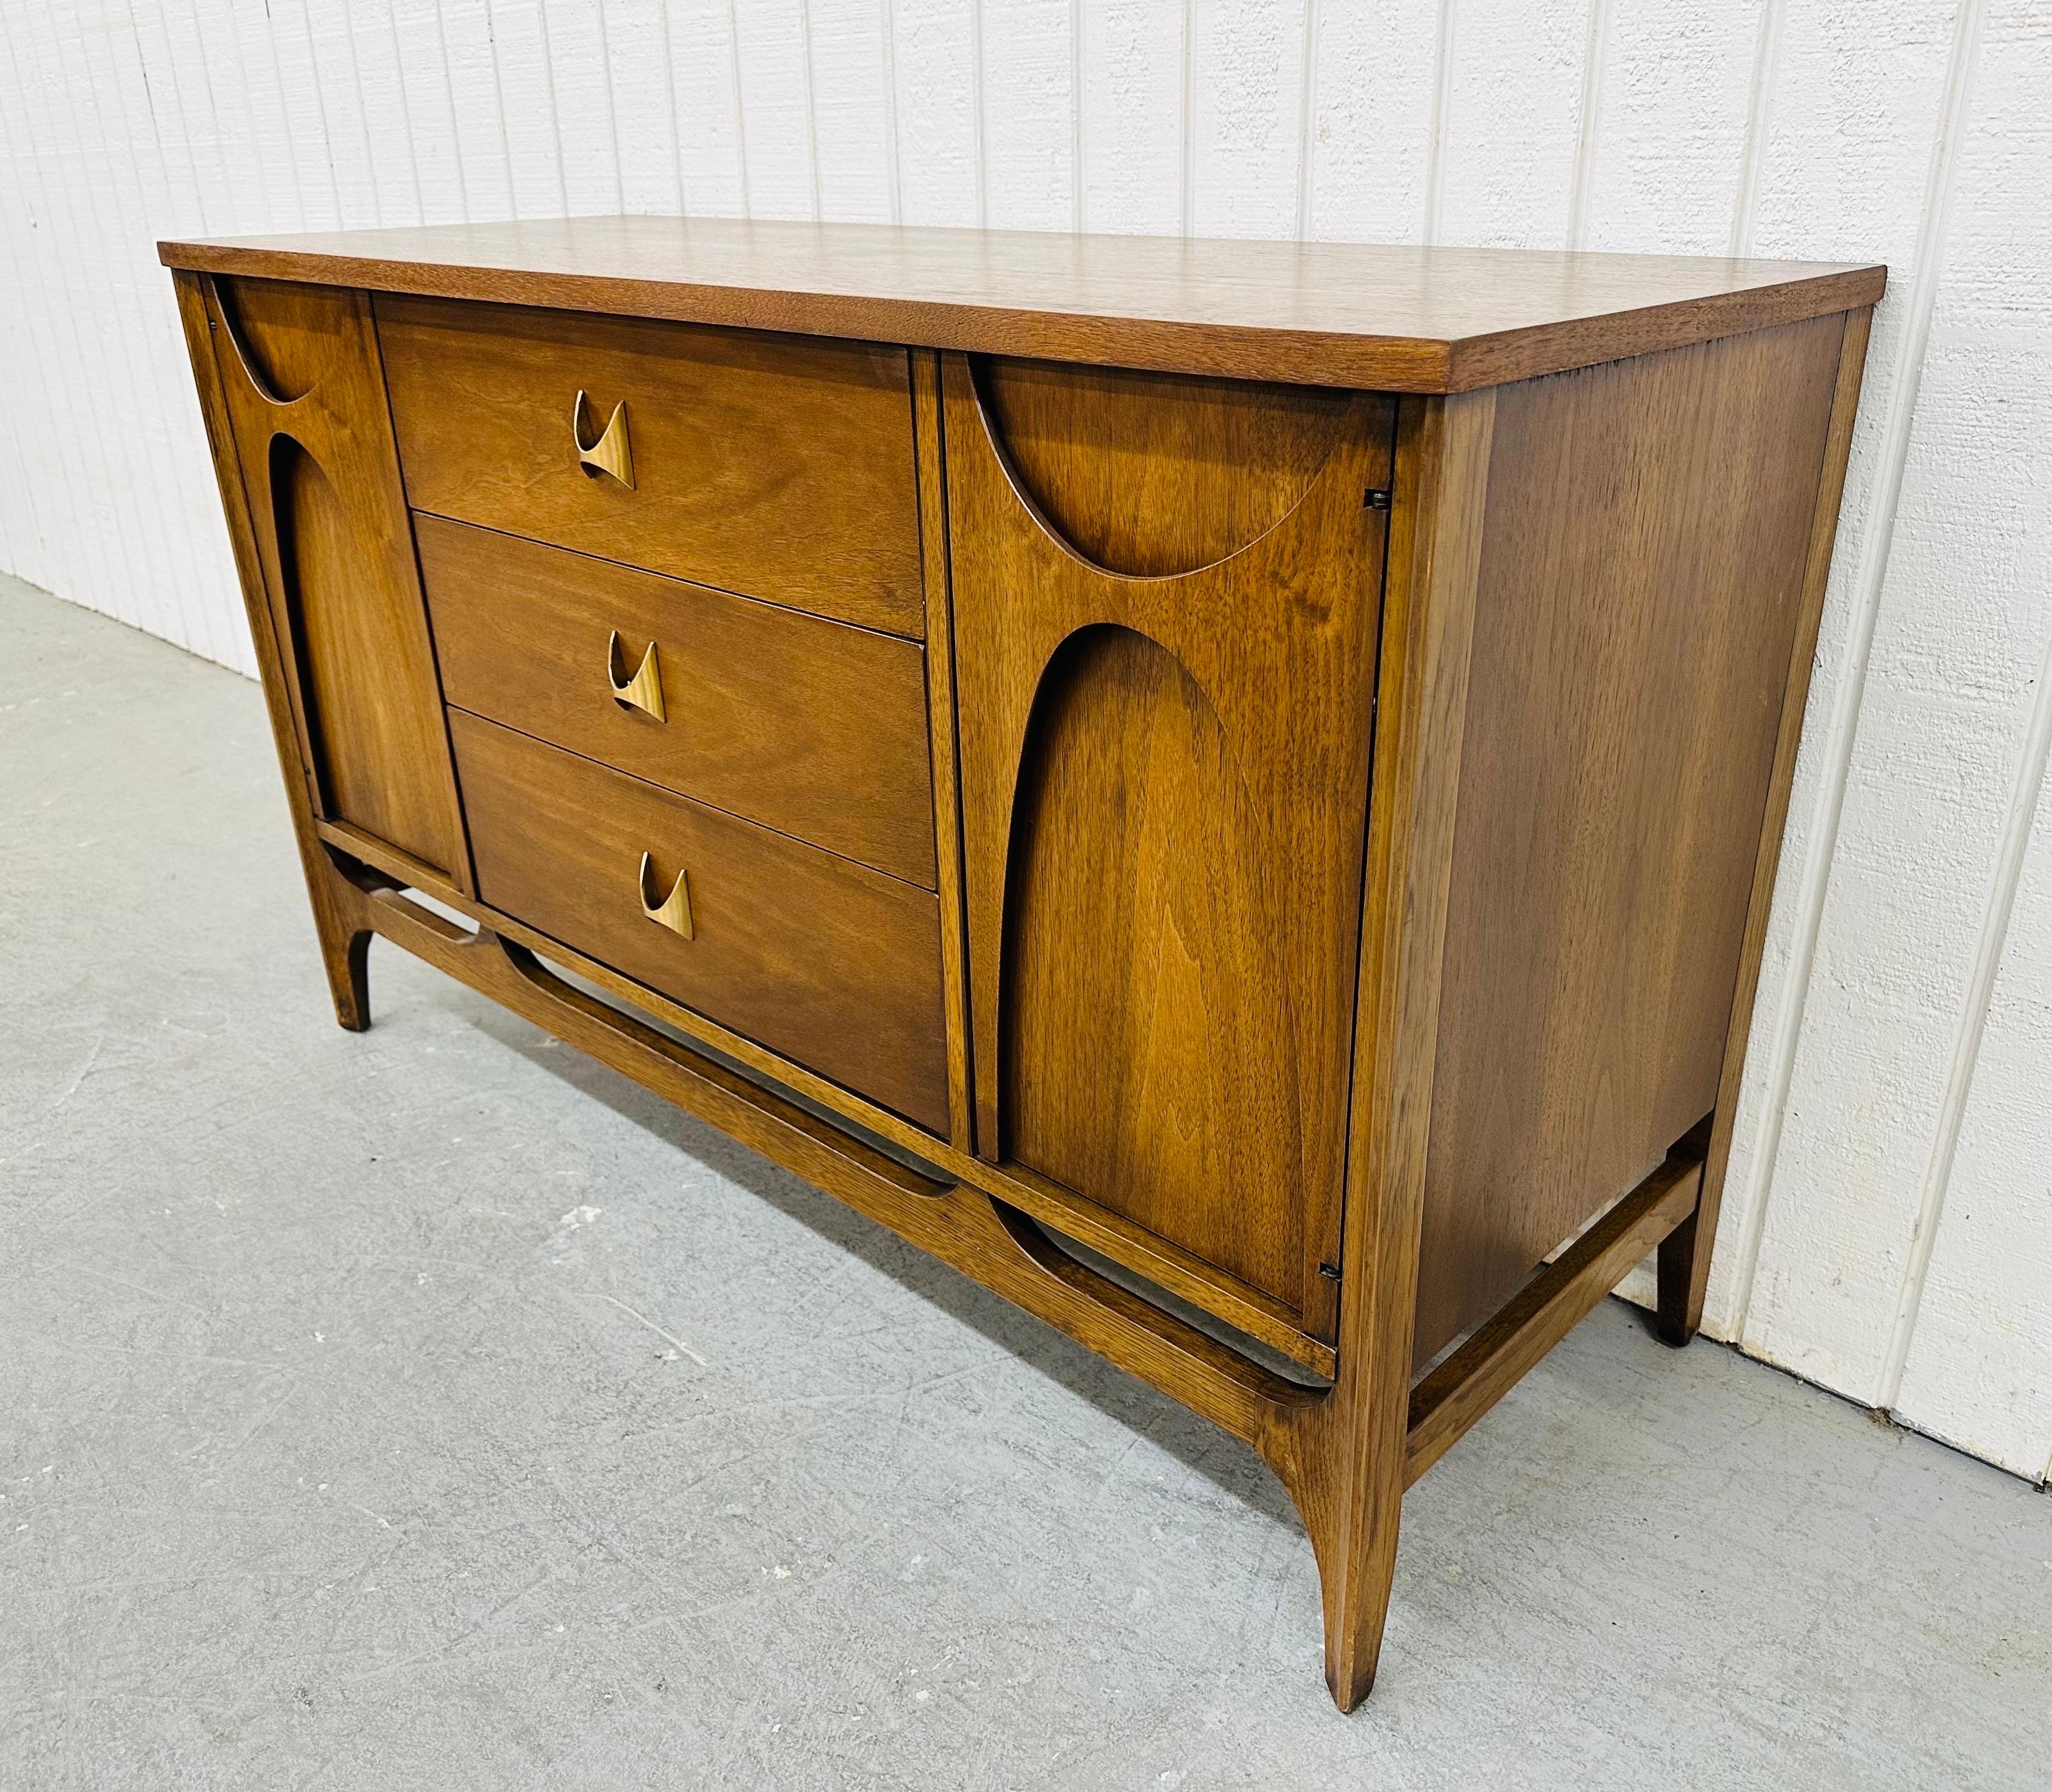 This listing is for an iconic Mid-Century Modern Broyhill Brasilia Walnut Server. Featuring a straight line design, two doors with the sculpted Brasilia pulls, the doors open up to fixed shelving storage space, three drawers in the center with